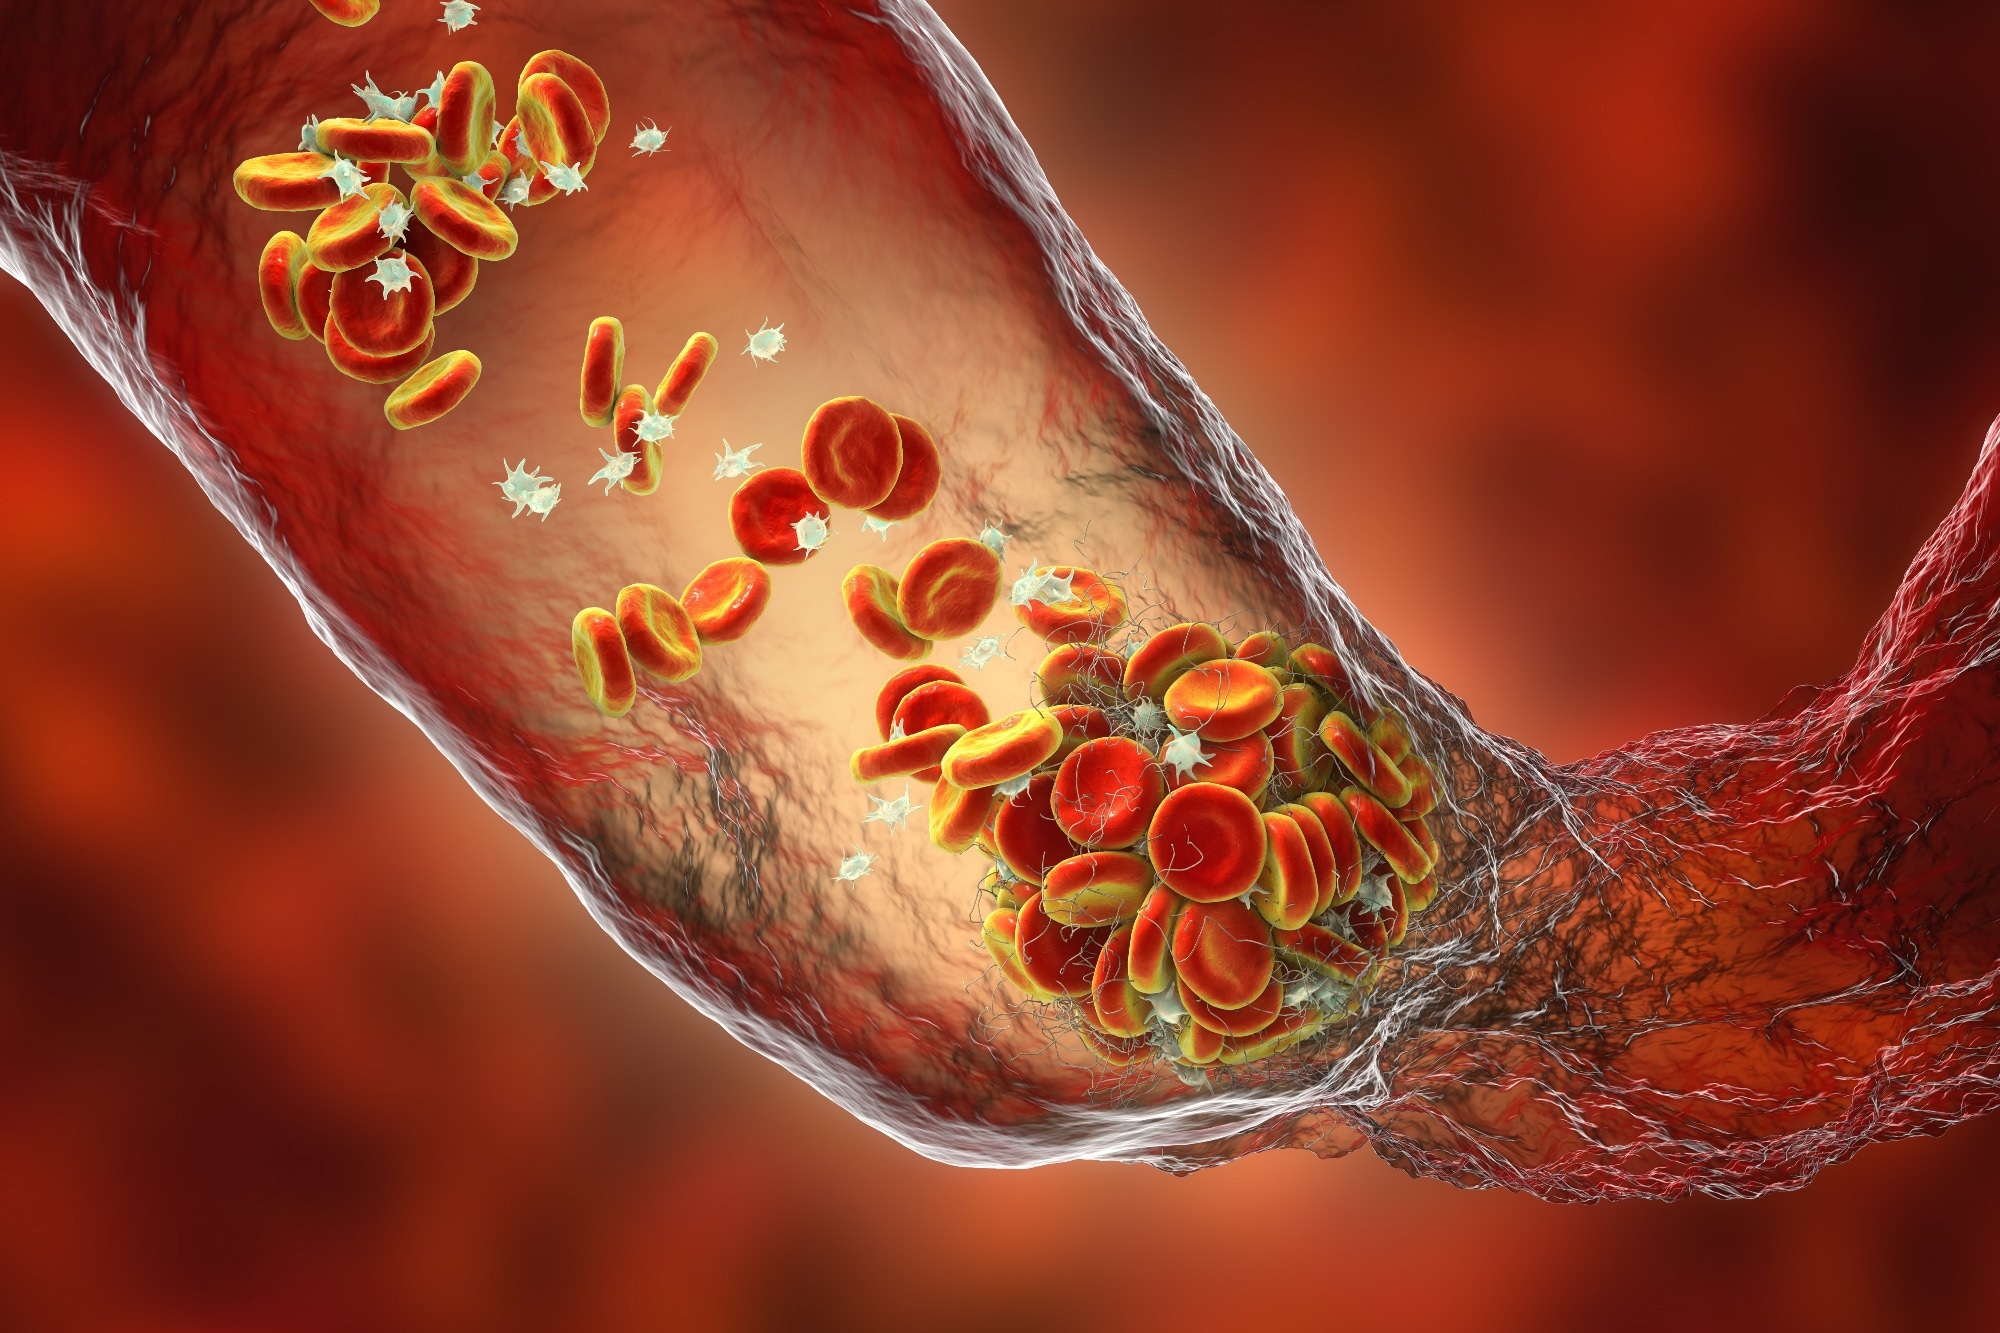 Study: Effect of Thromboprophylaxis on Clinical Outcomes After COVID-19 Hospitalization. Image Credit: Kateryna Kon / Shutterstock